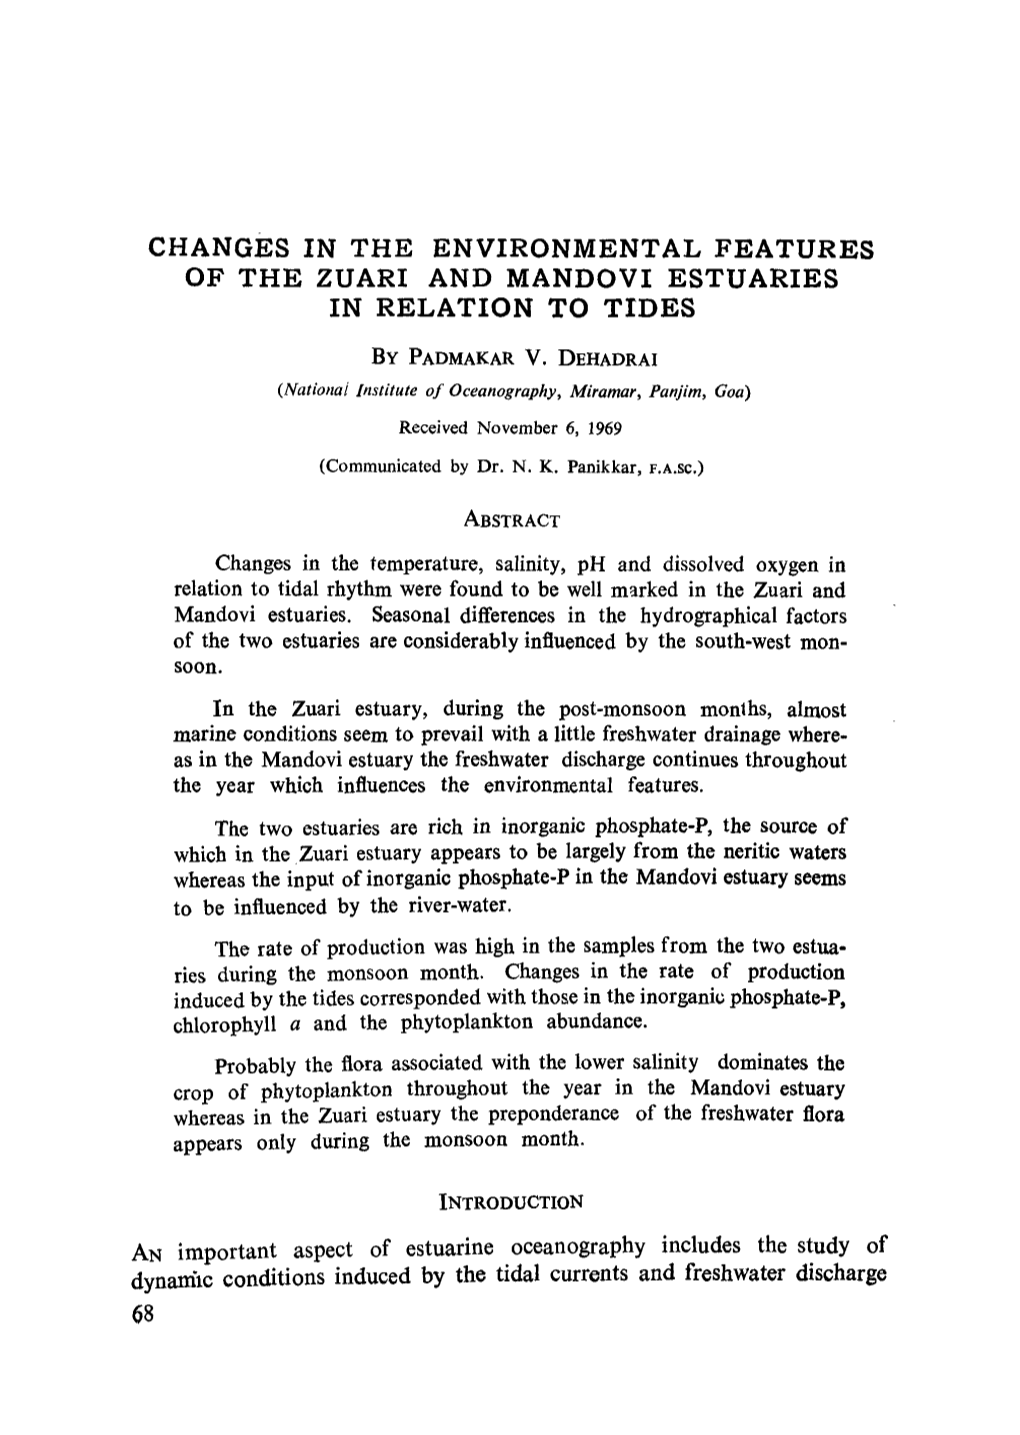 Changes in the Environmental Features of the Zuari and Mandovi Estuaries in Relation to Tides by Padmakar V